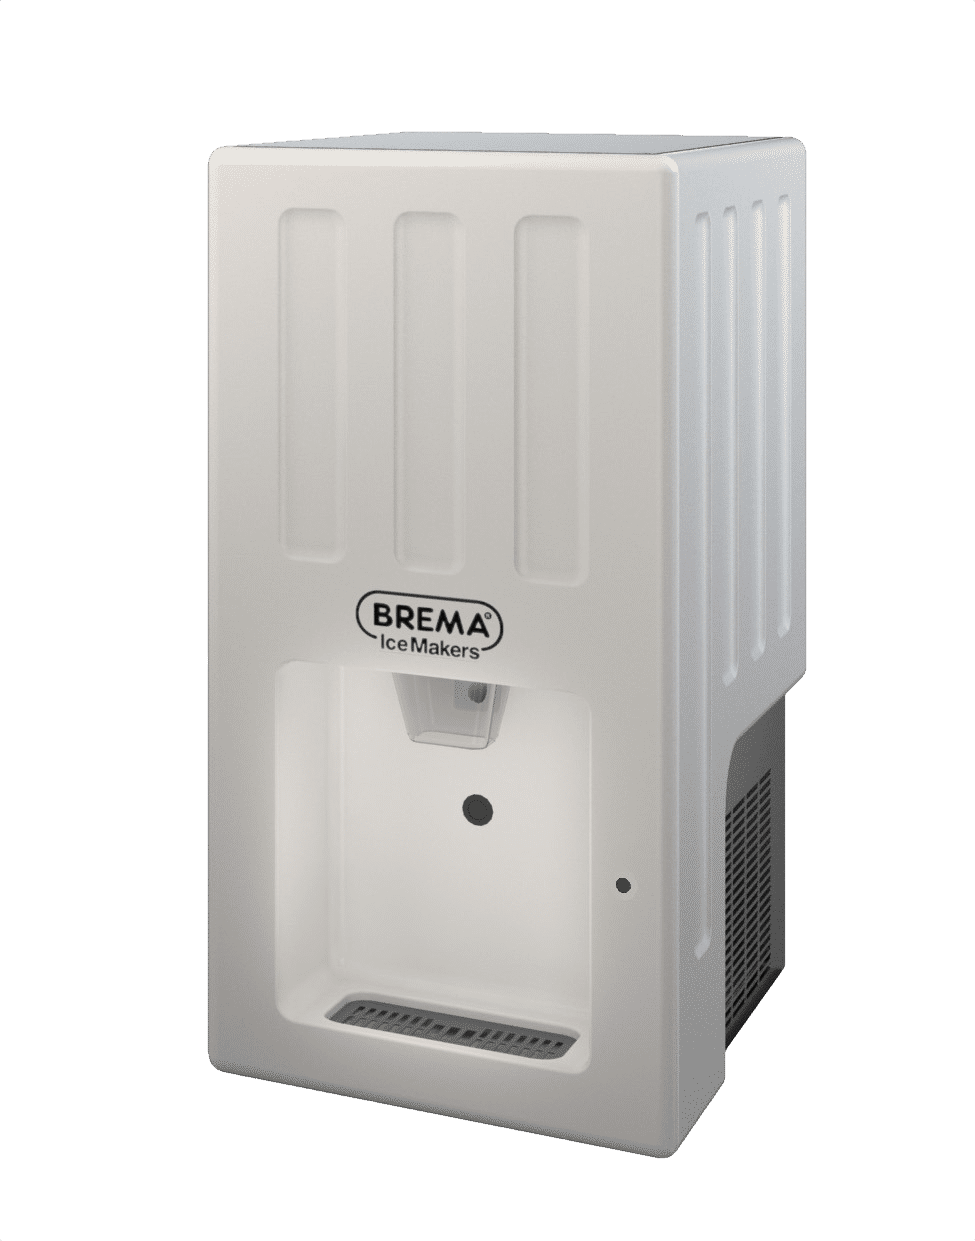 Buy Brema Ice Maker Hiku 26 HC at best price in India with Free Shipping, Installation & Service